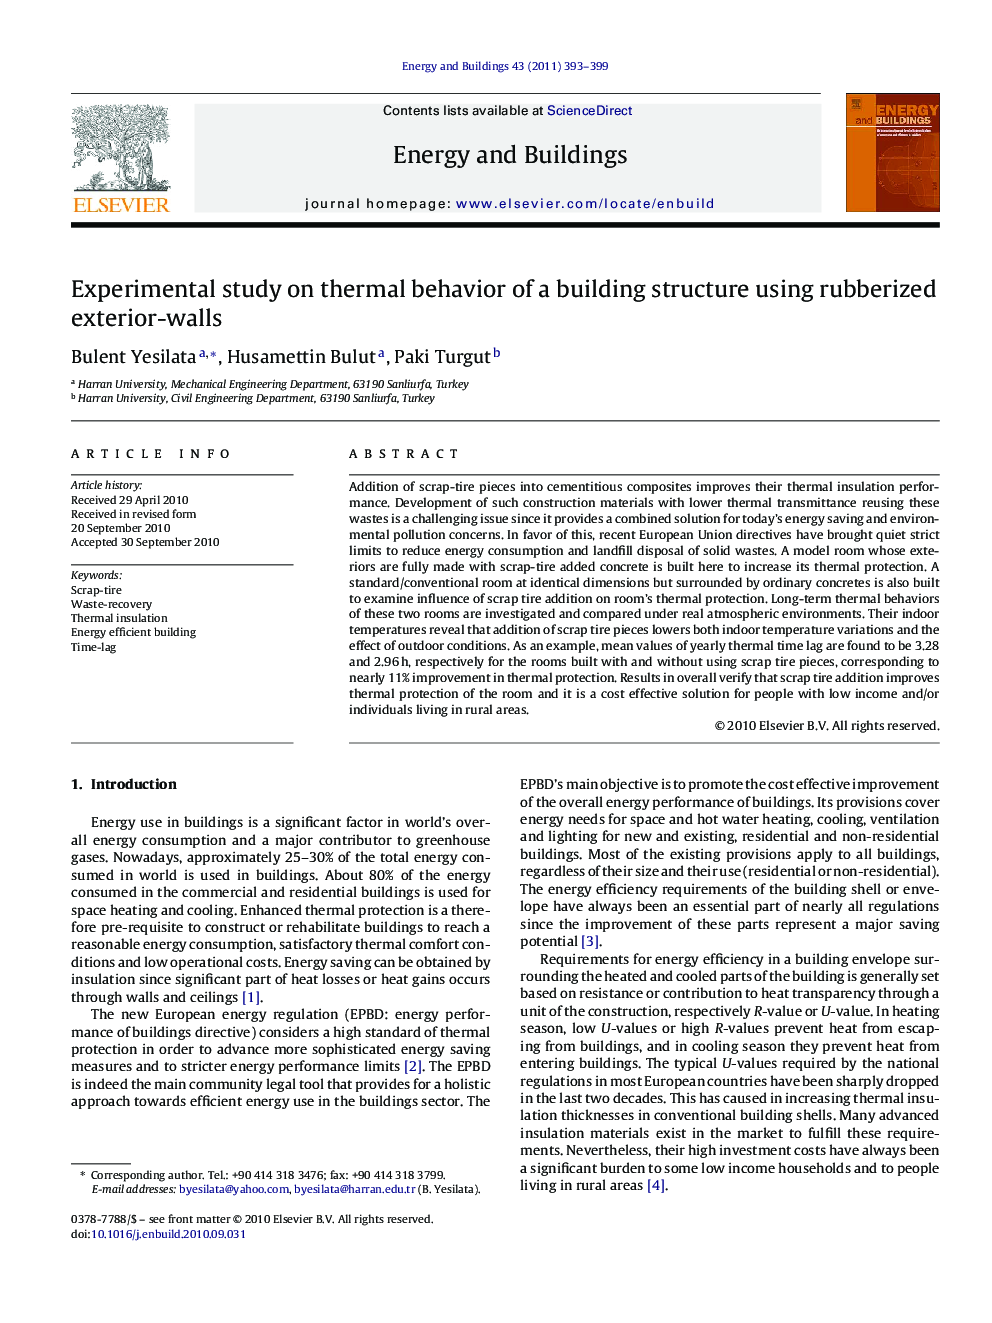 Experimental study on thermal behavior of a building structure using rubberized exterior-walls